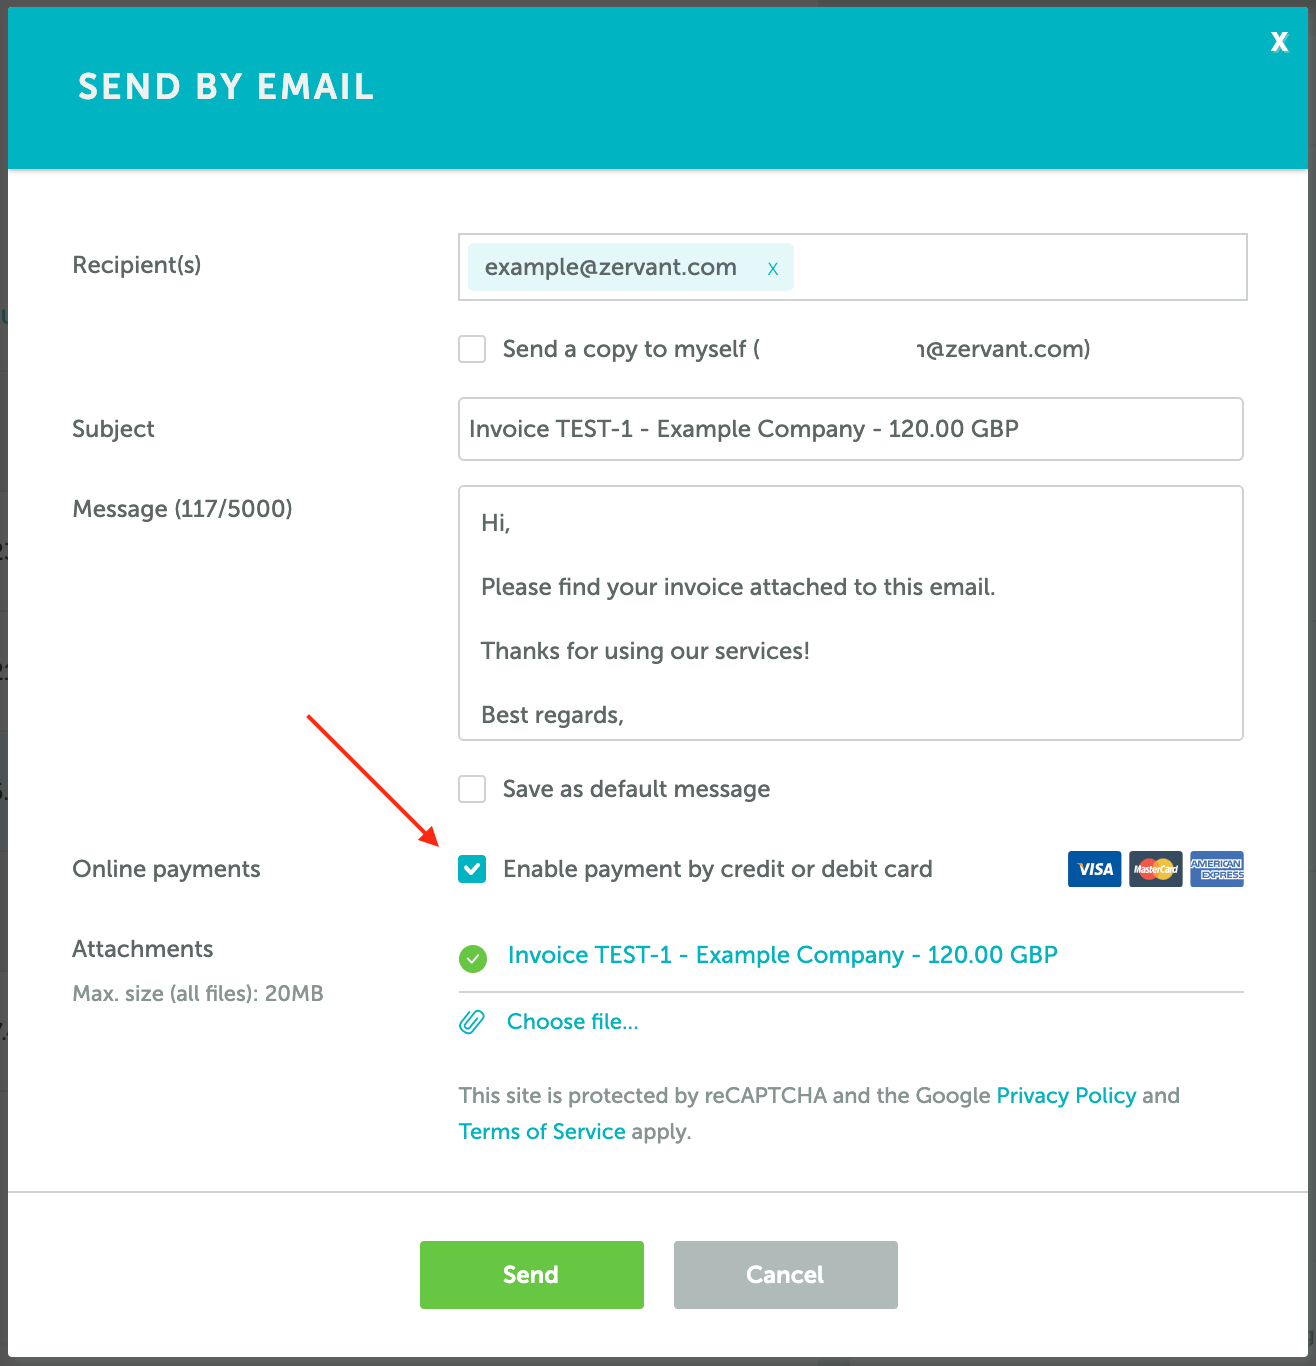 Activating Online Payments in email invoices in Zervant